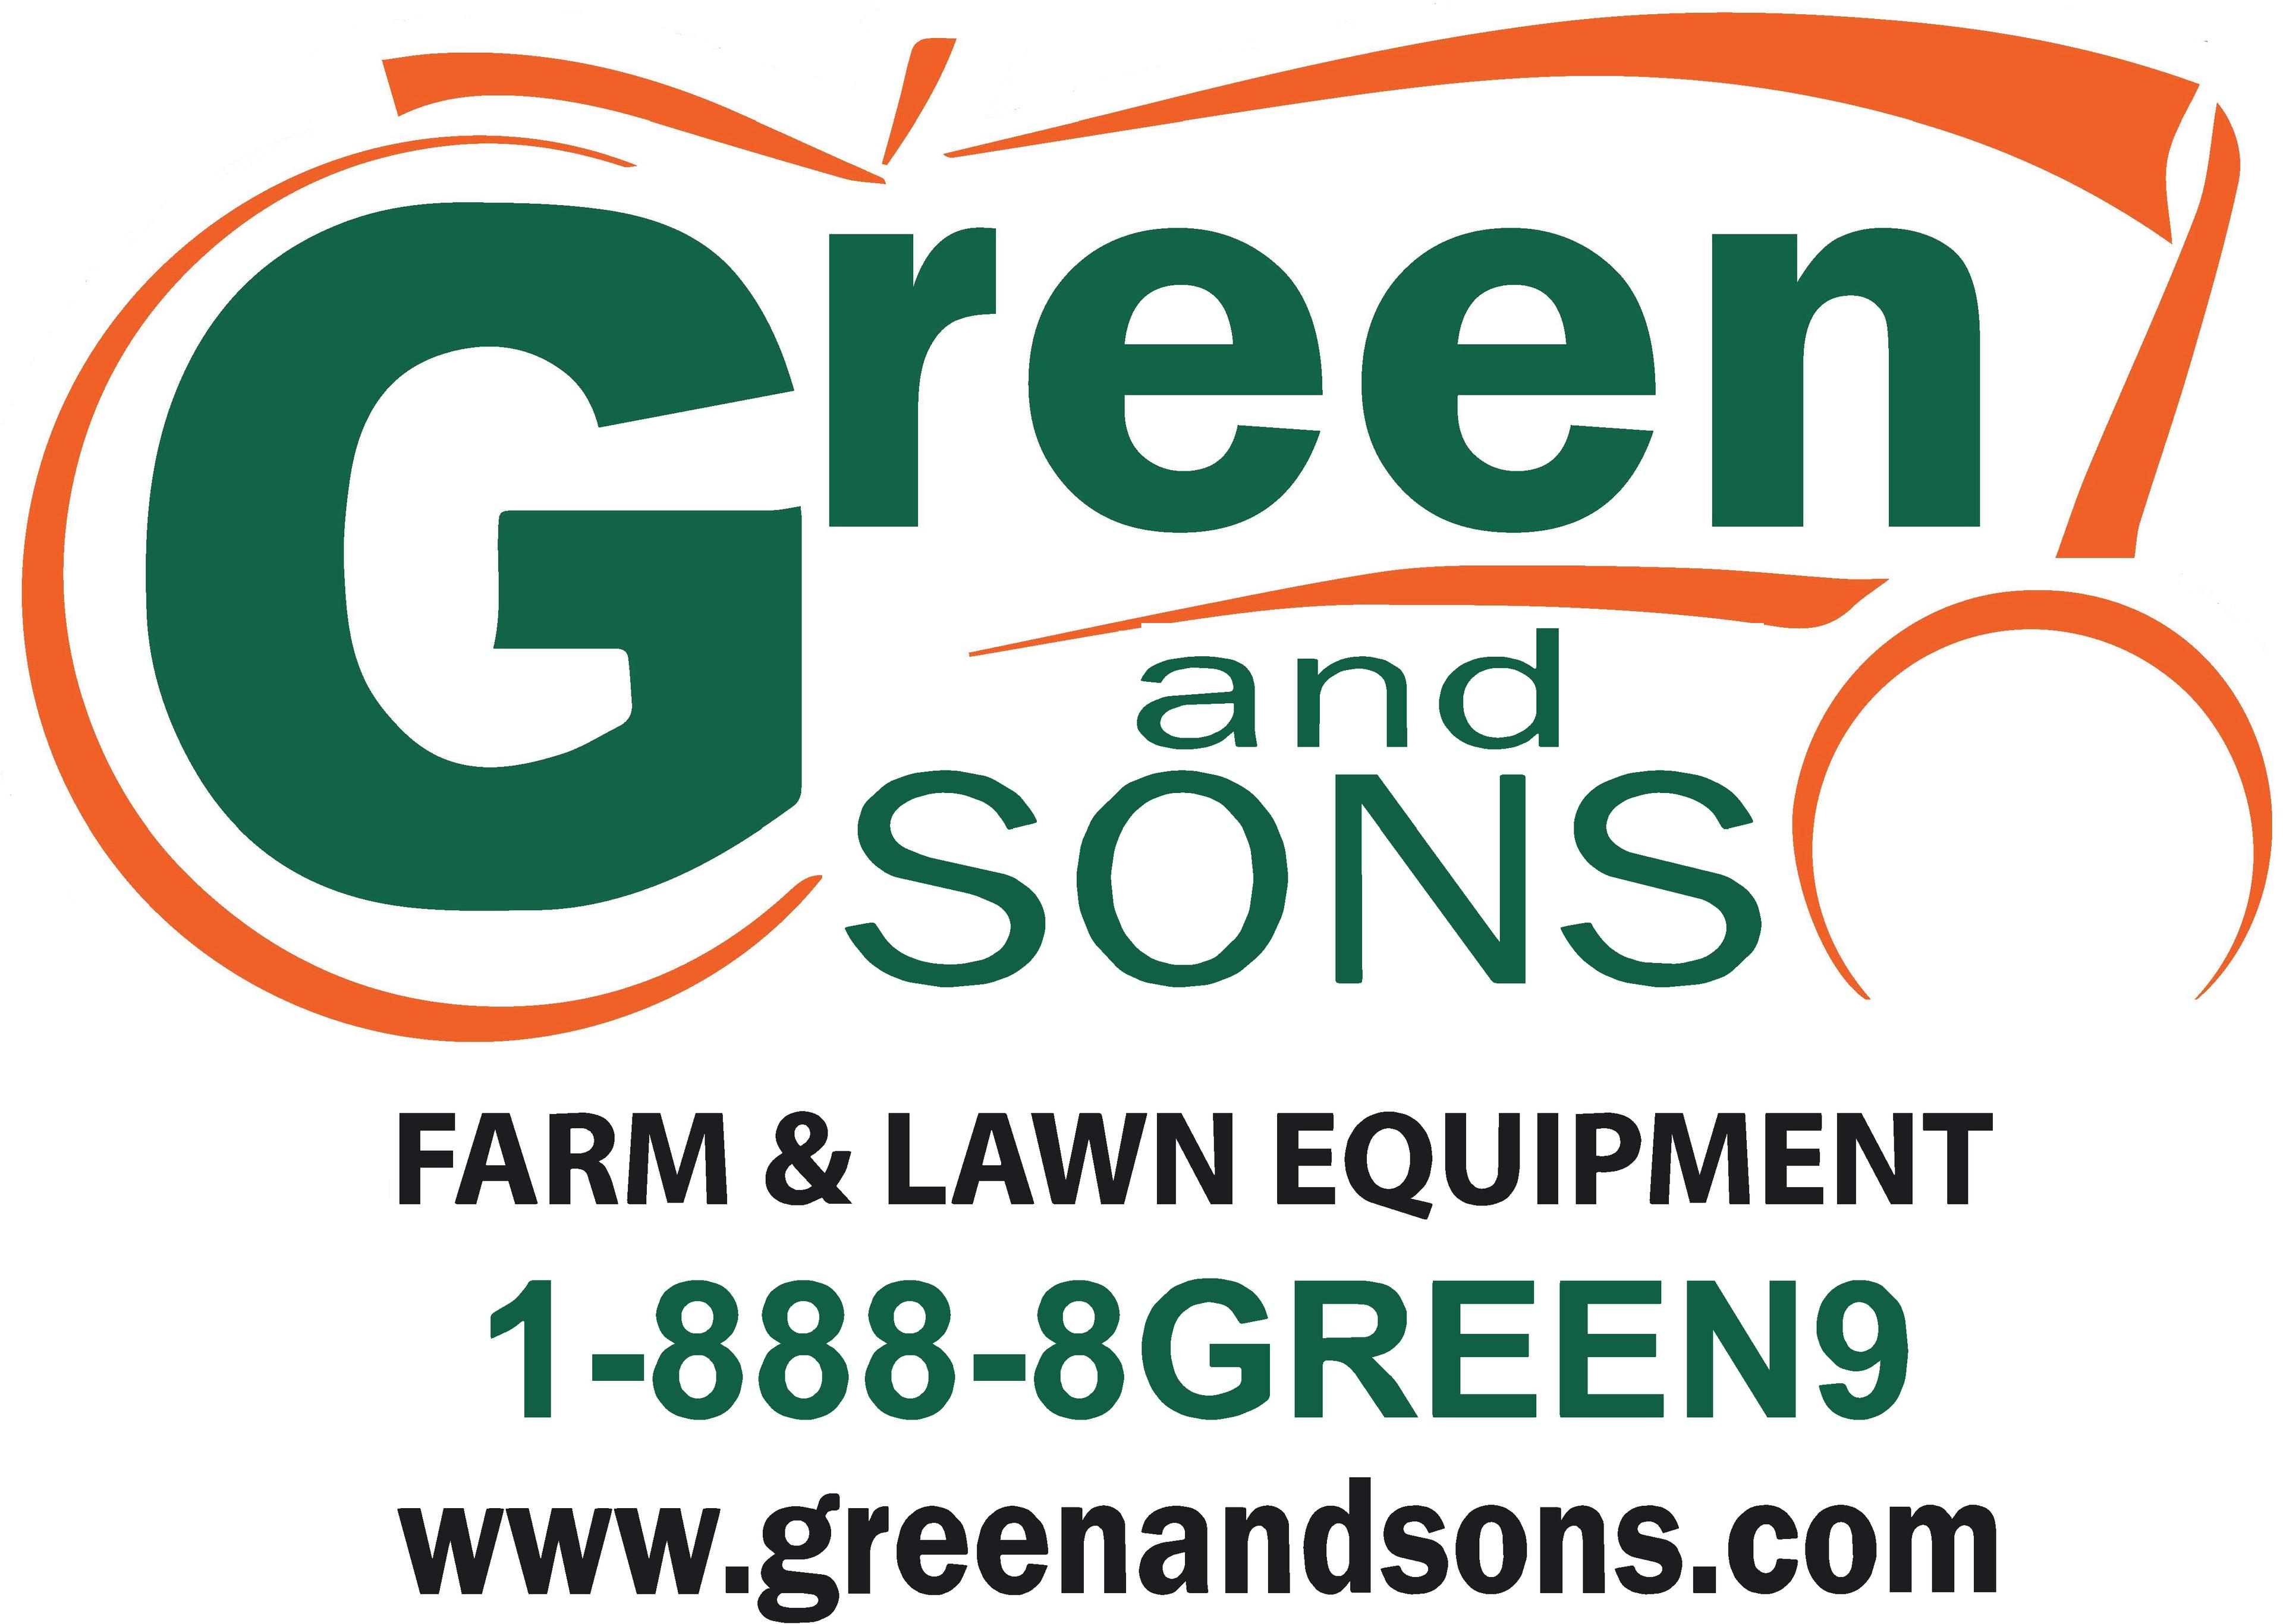 Green and Sons Farm & Lawn Equipment